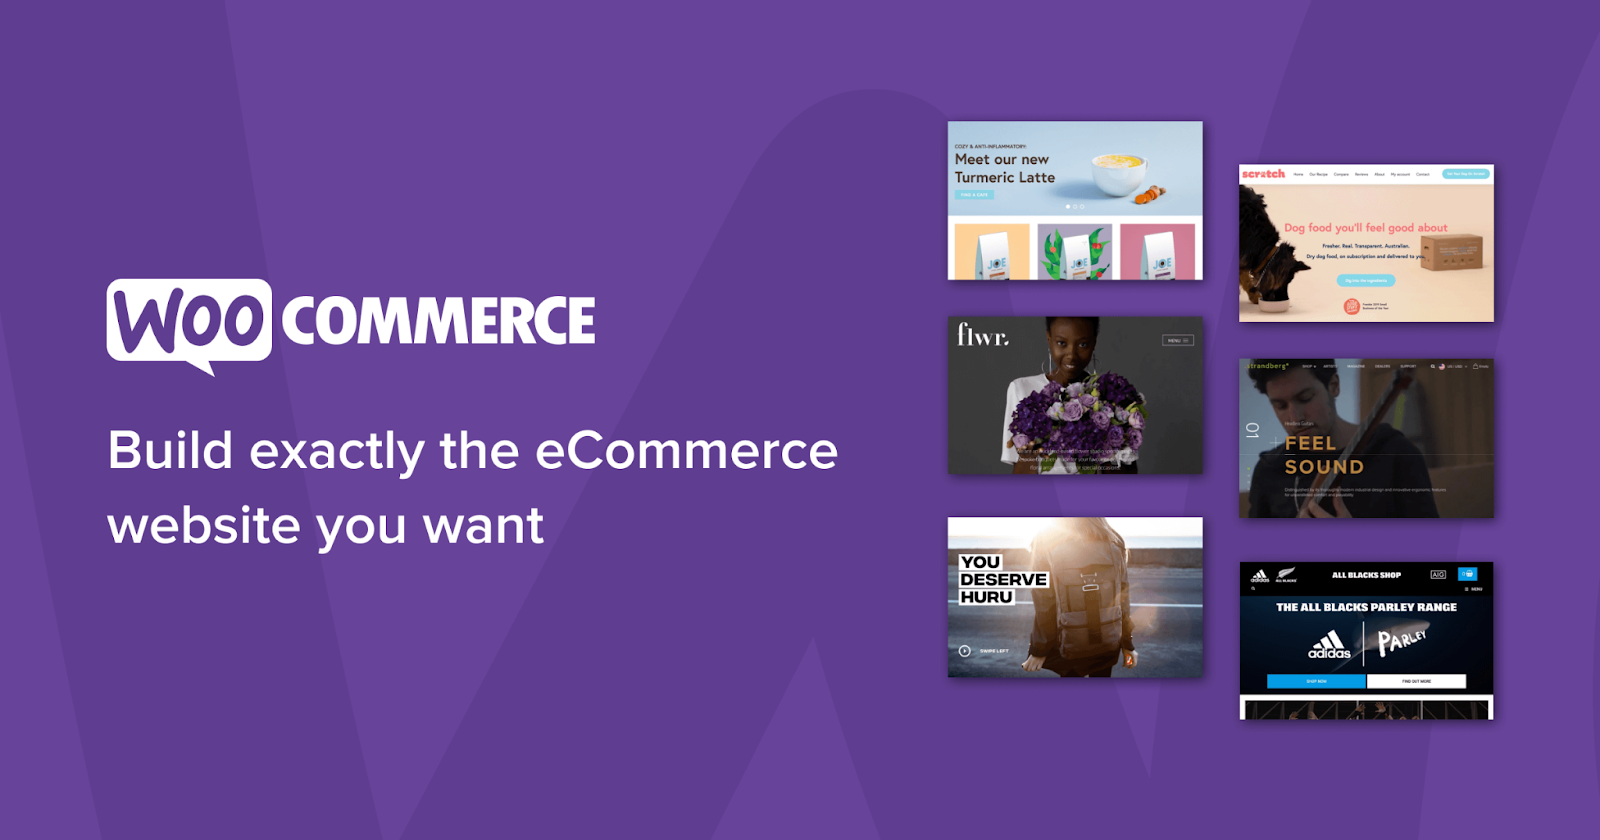 Woocommerce services